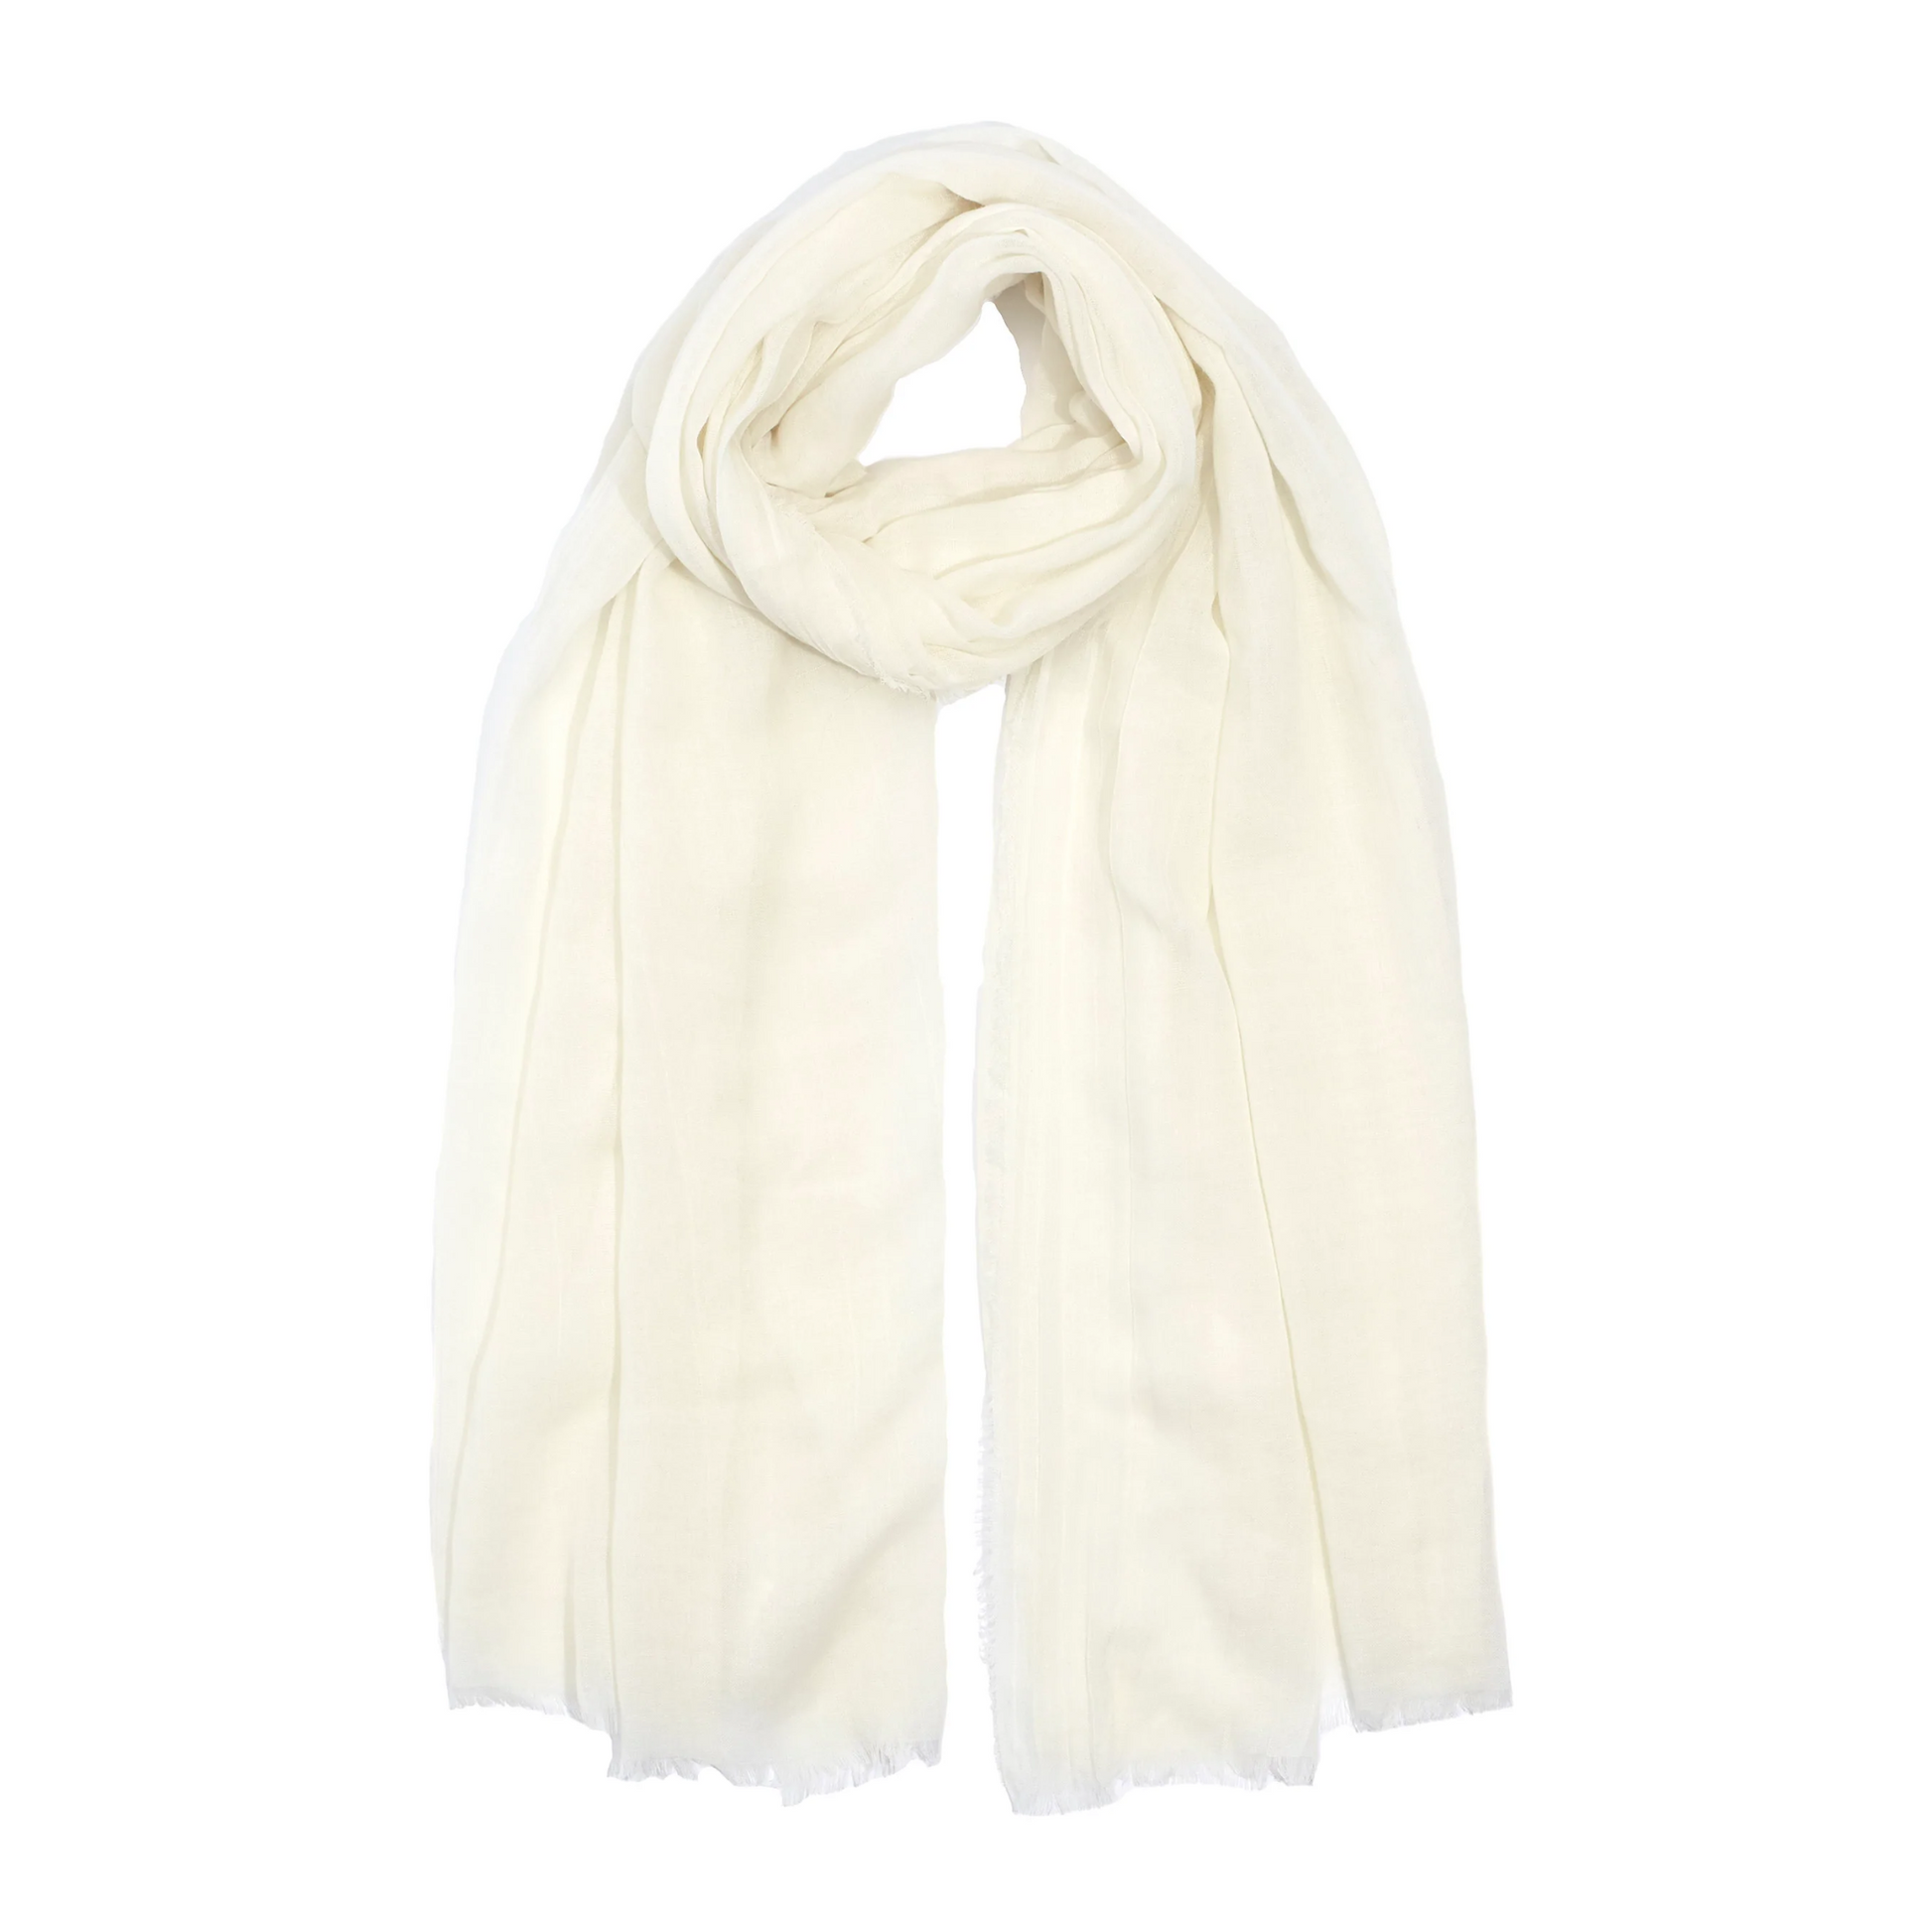 A cream scarf with translucent quality is pictured with a top loop allowing the scarf to fold.